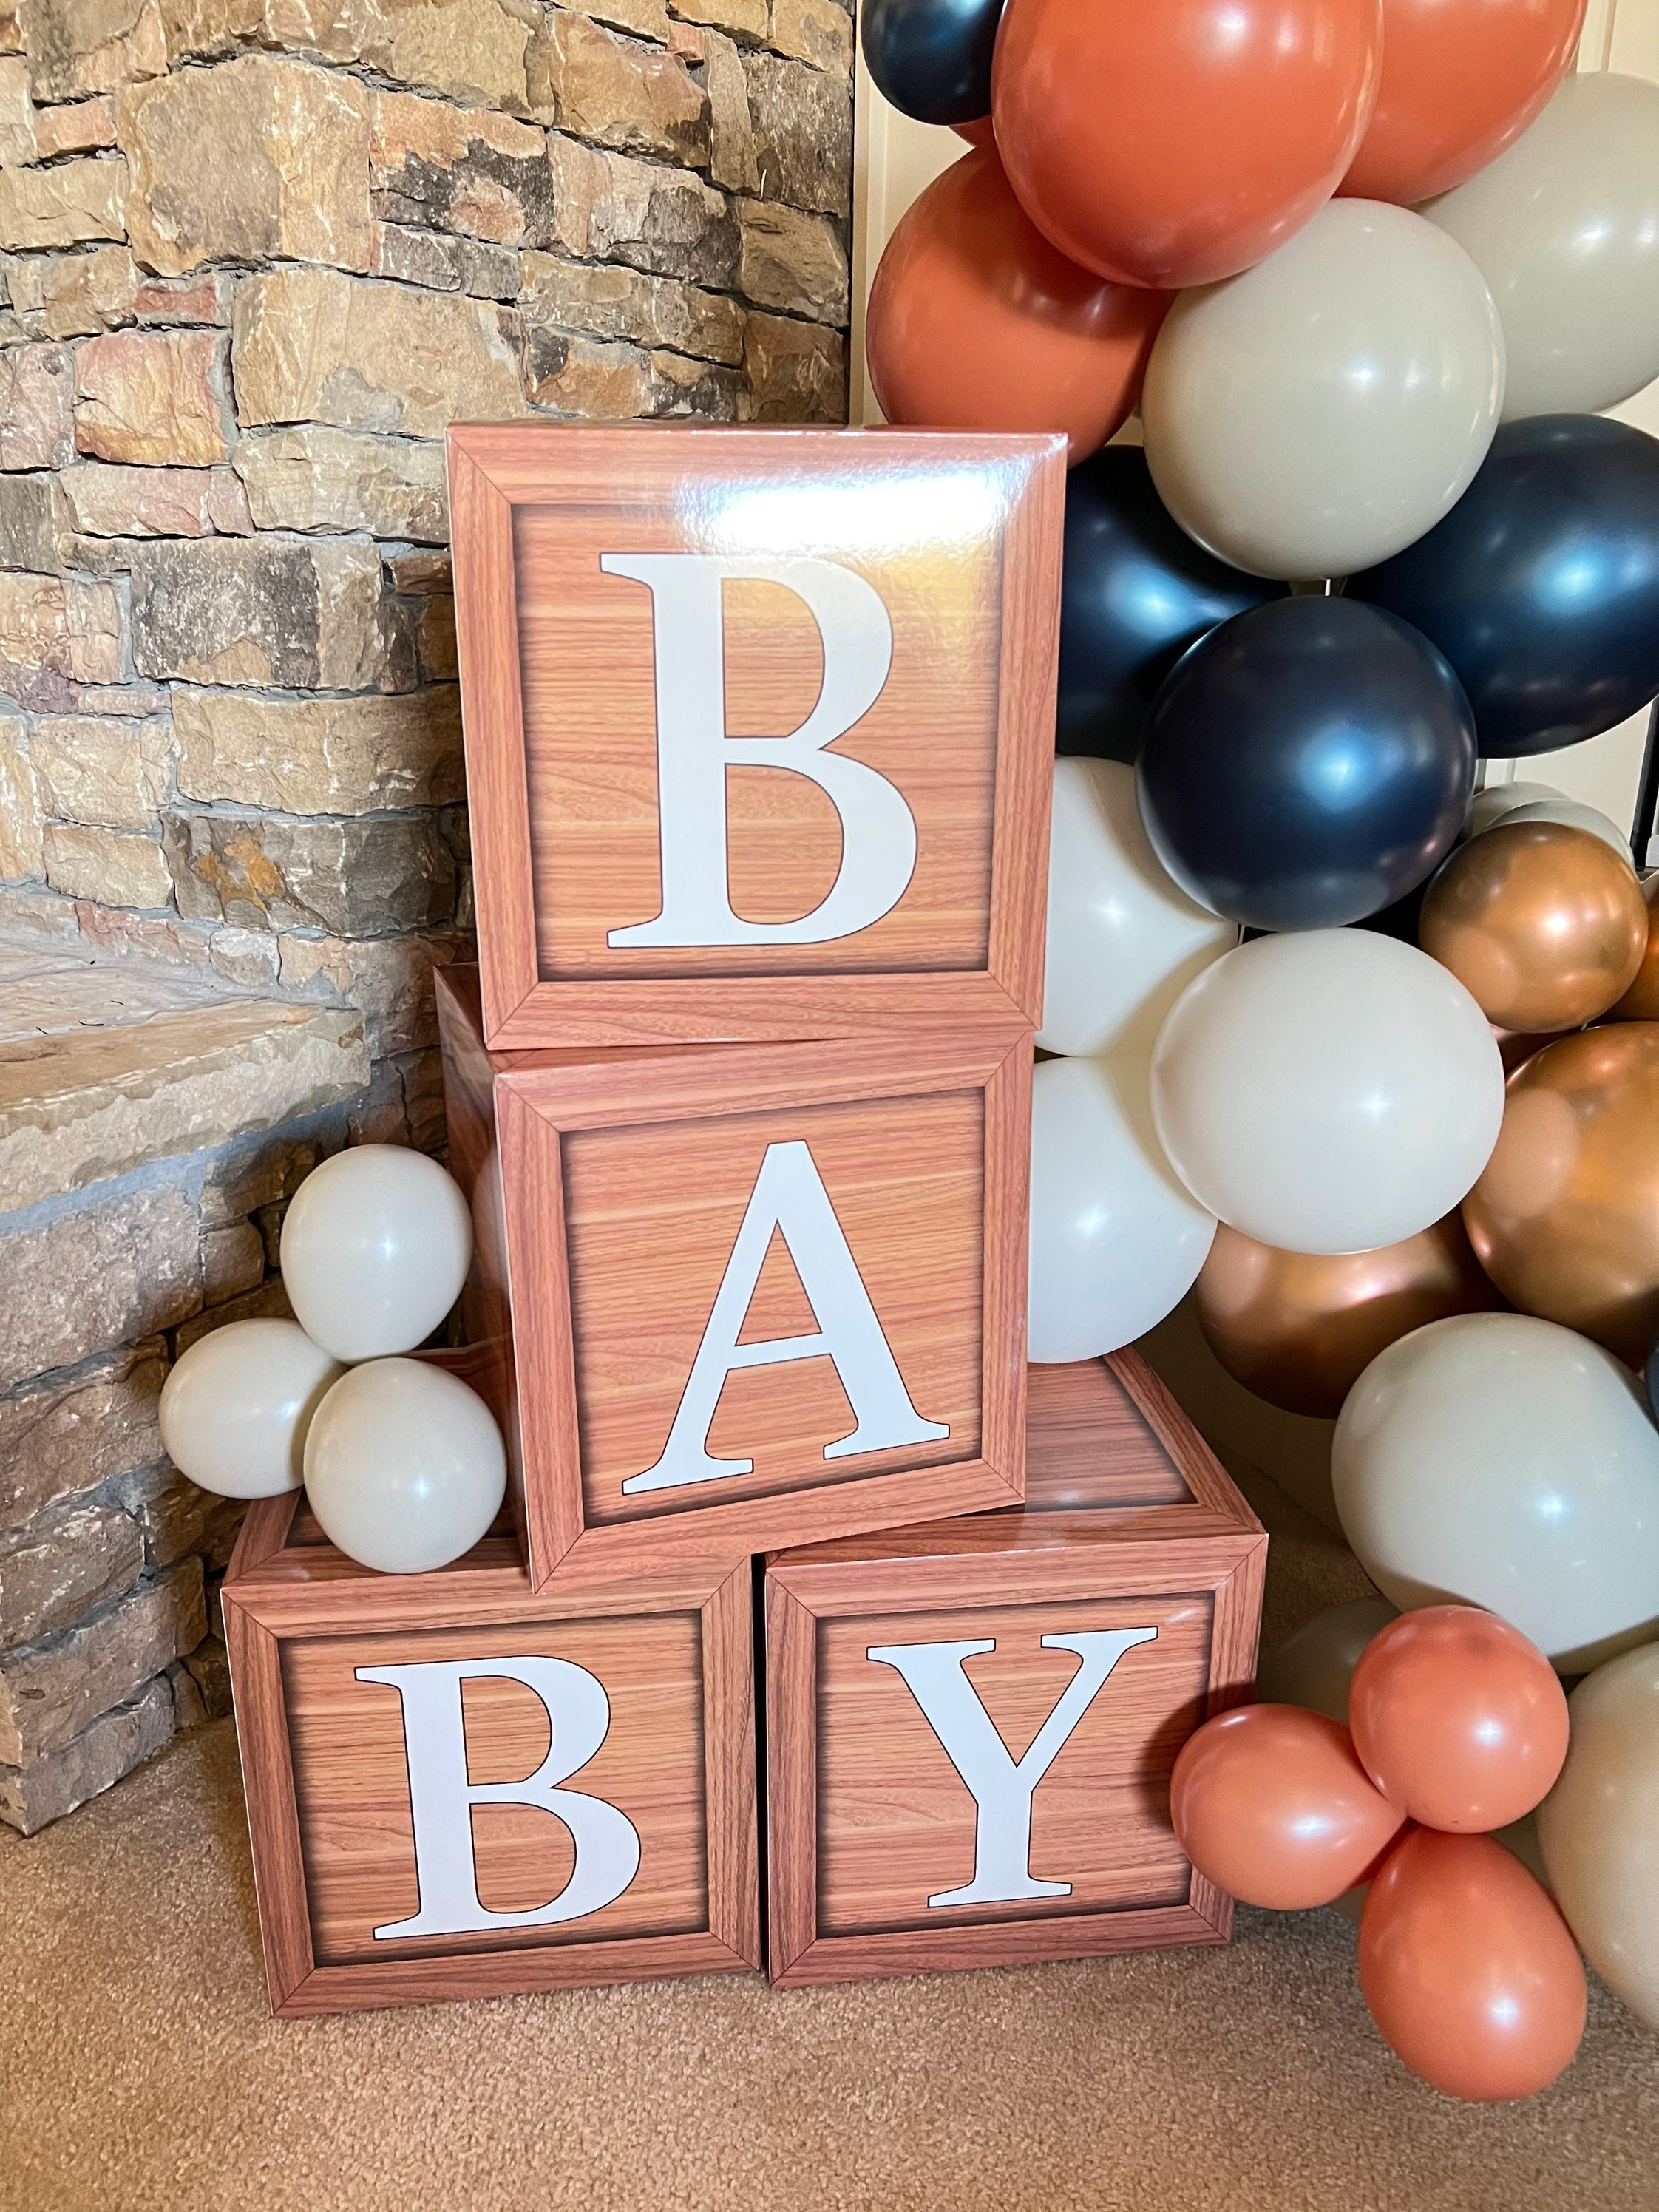 Vintage Wooden Grain Baby Shower Decorations - Adorable Balloon